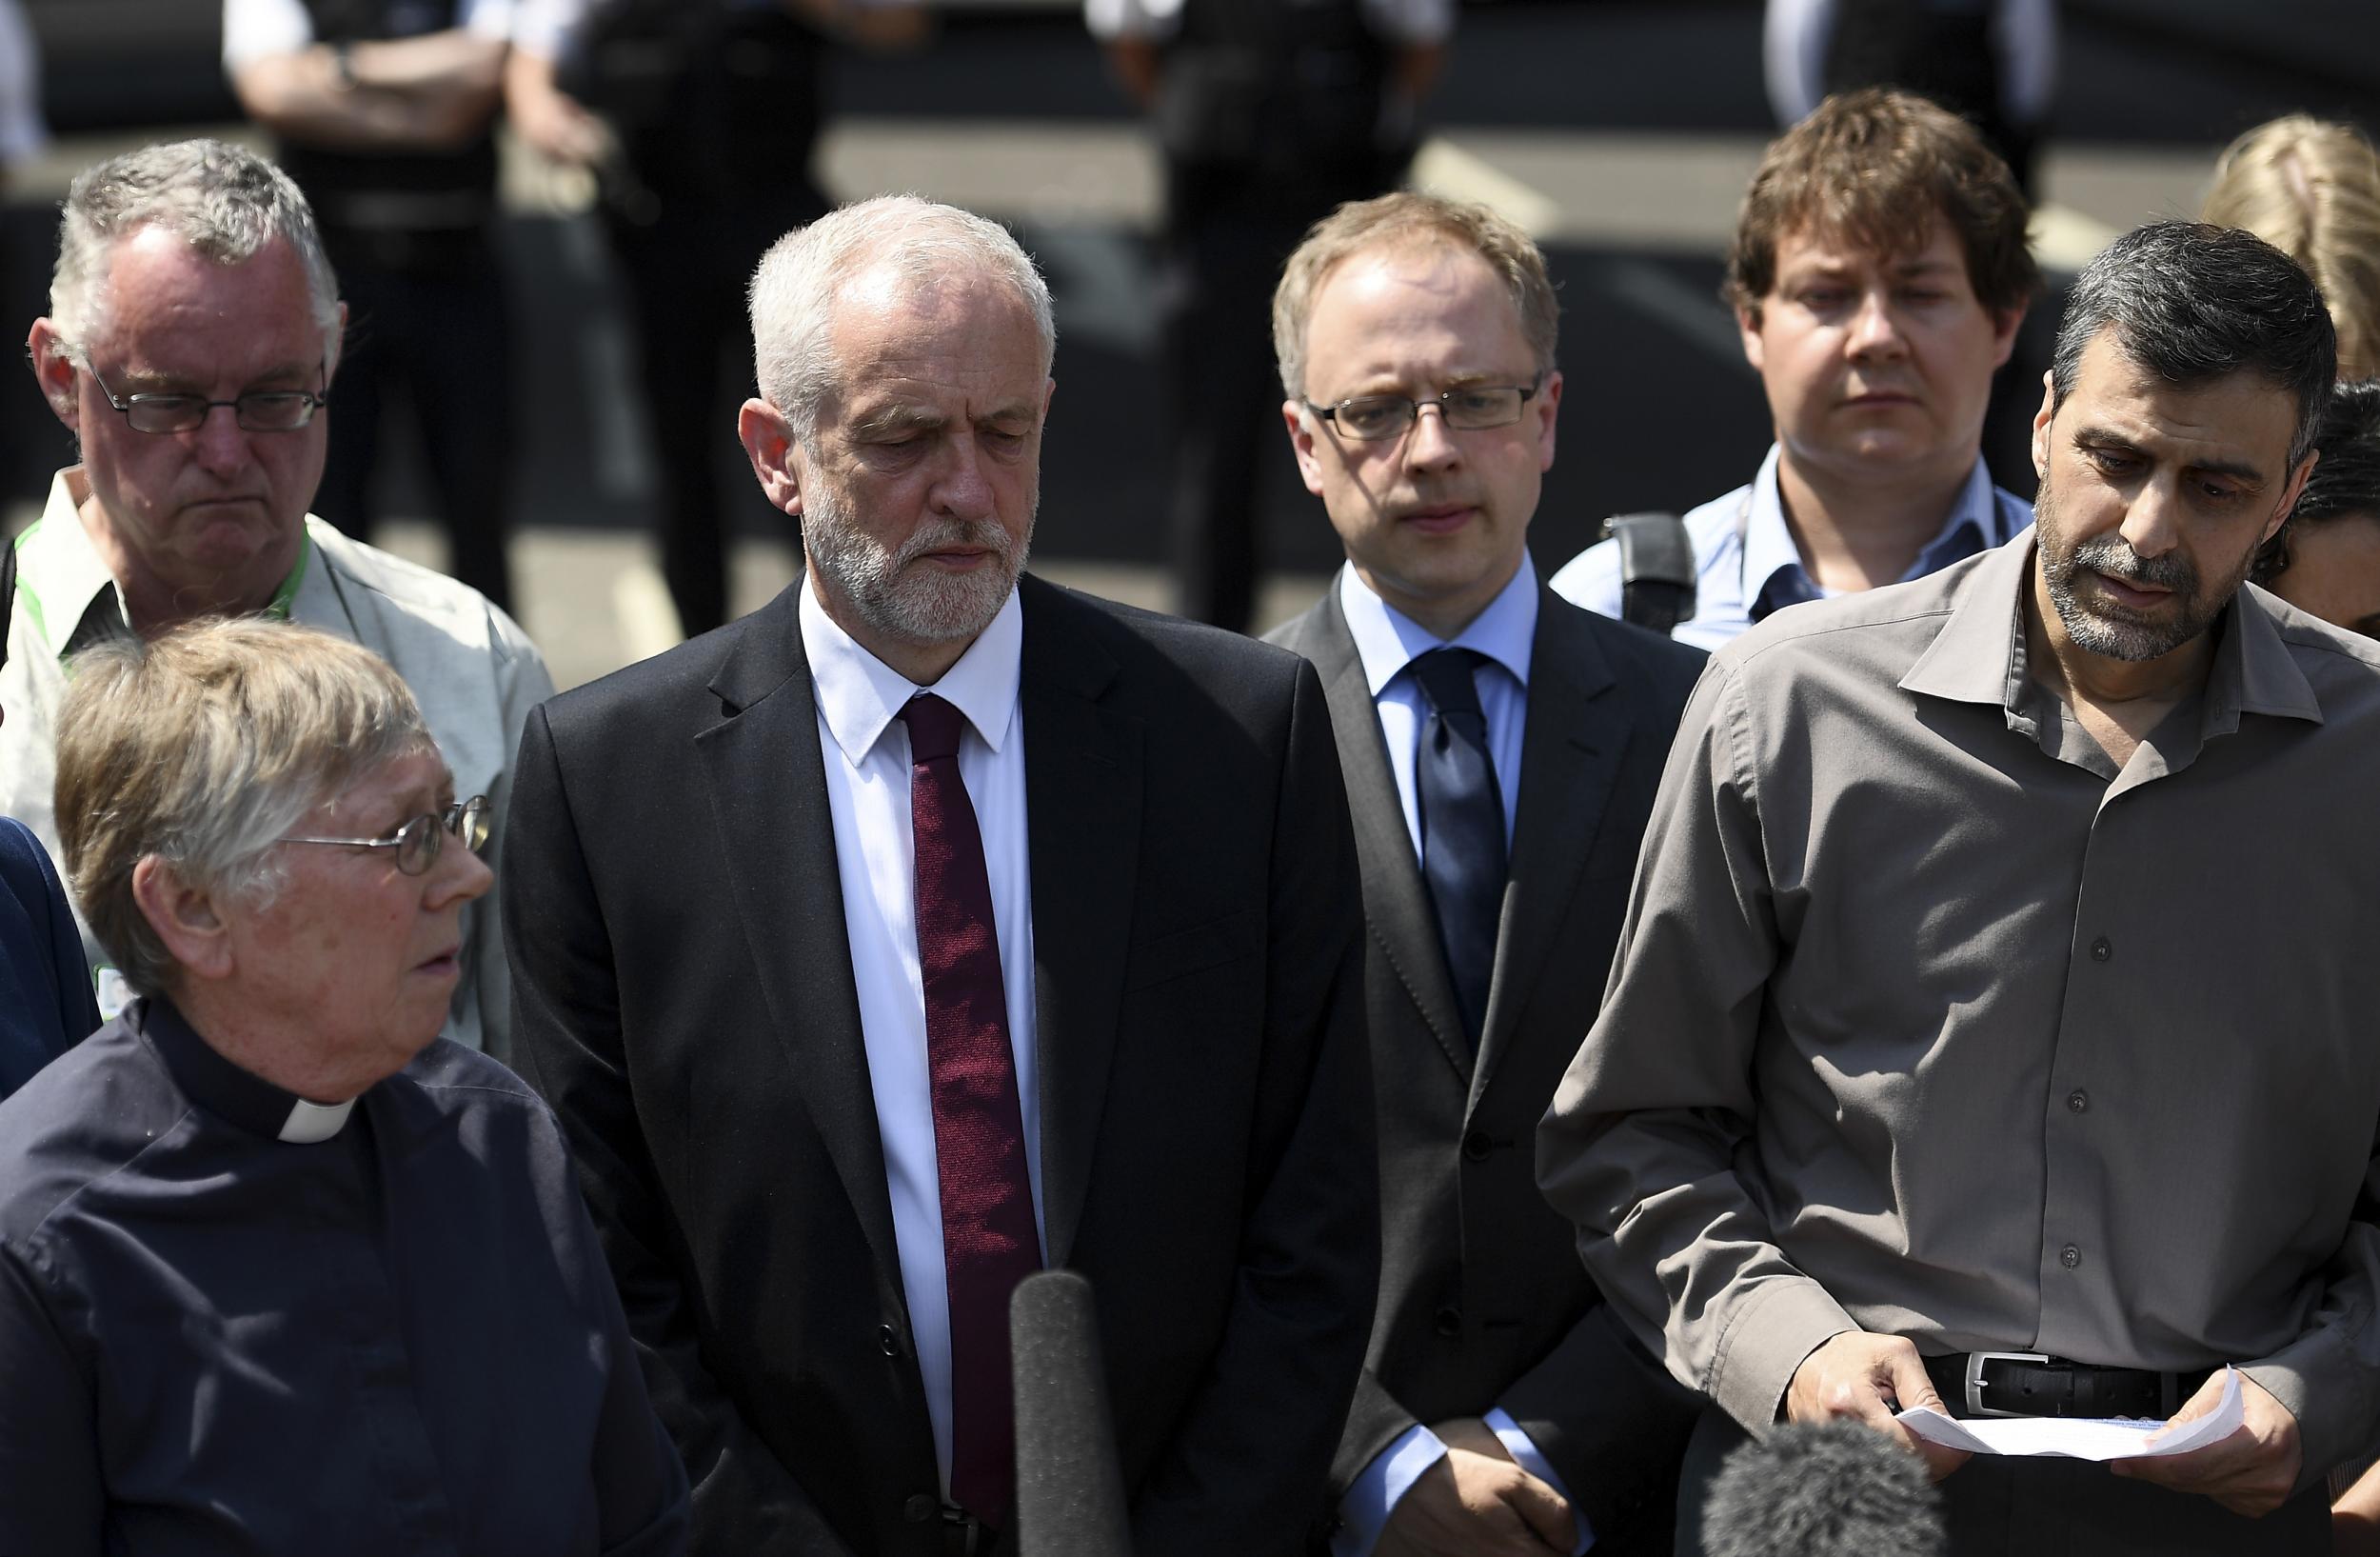 Labour Leader Jeremy Corbyn stands next to Finsbury Park Mosque chairman Mohammed Kozbar (r) after the June 2017 attack